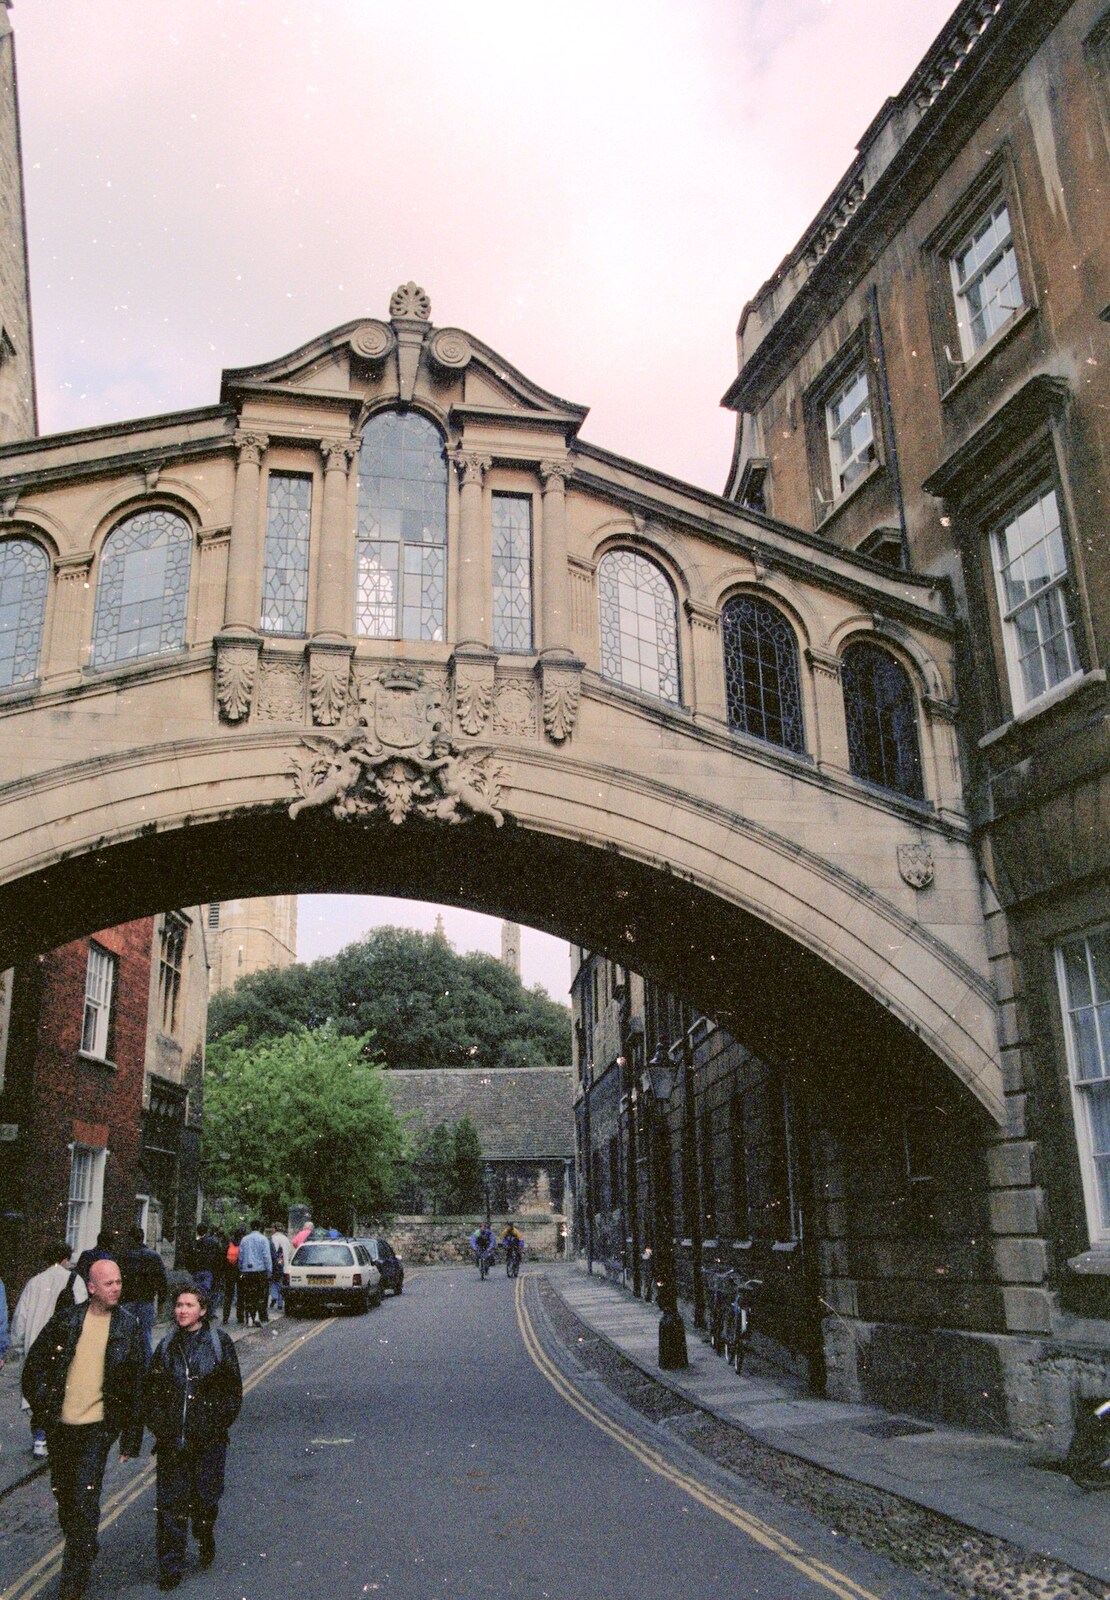 Hamish's Oxford Party, Oxfordshire - 25th April 1992: The Bridge of Sighs